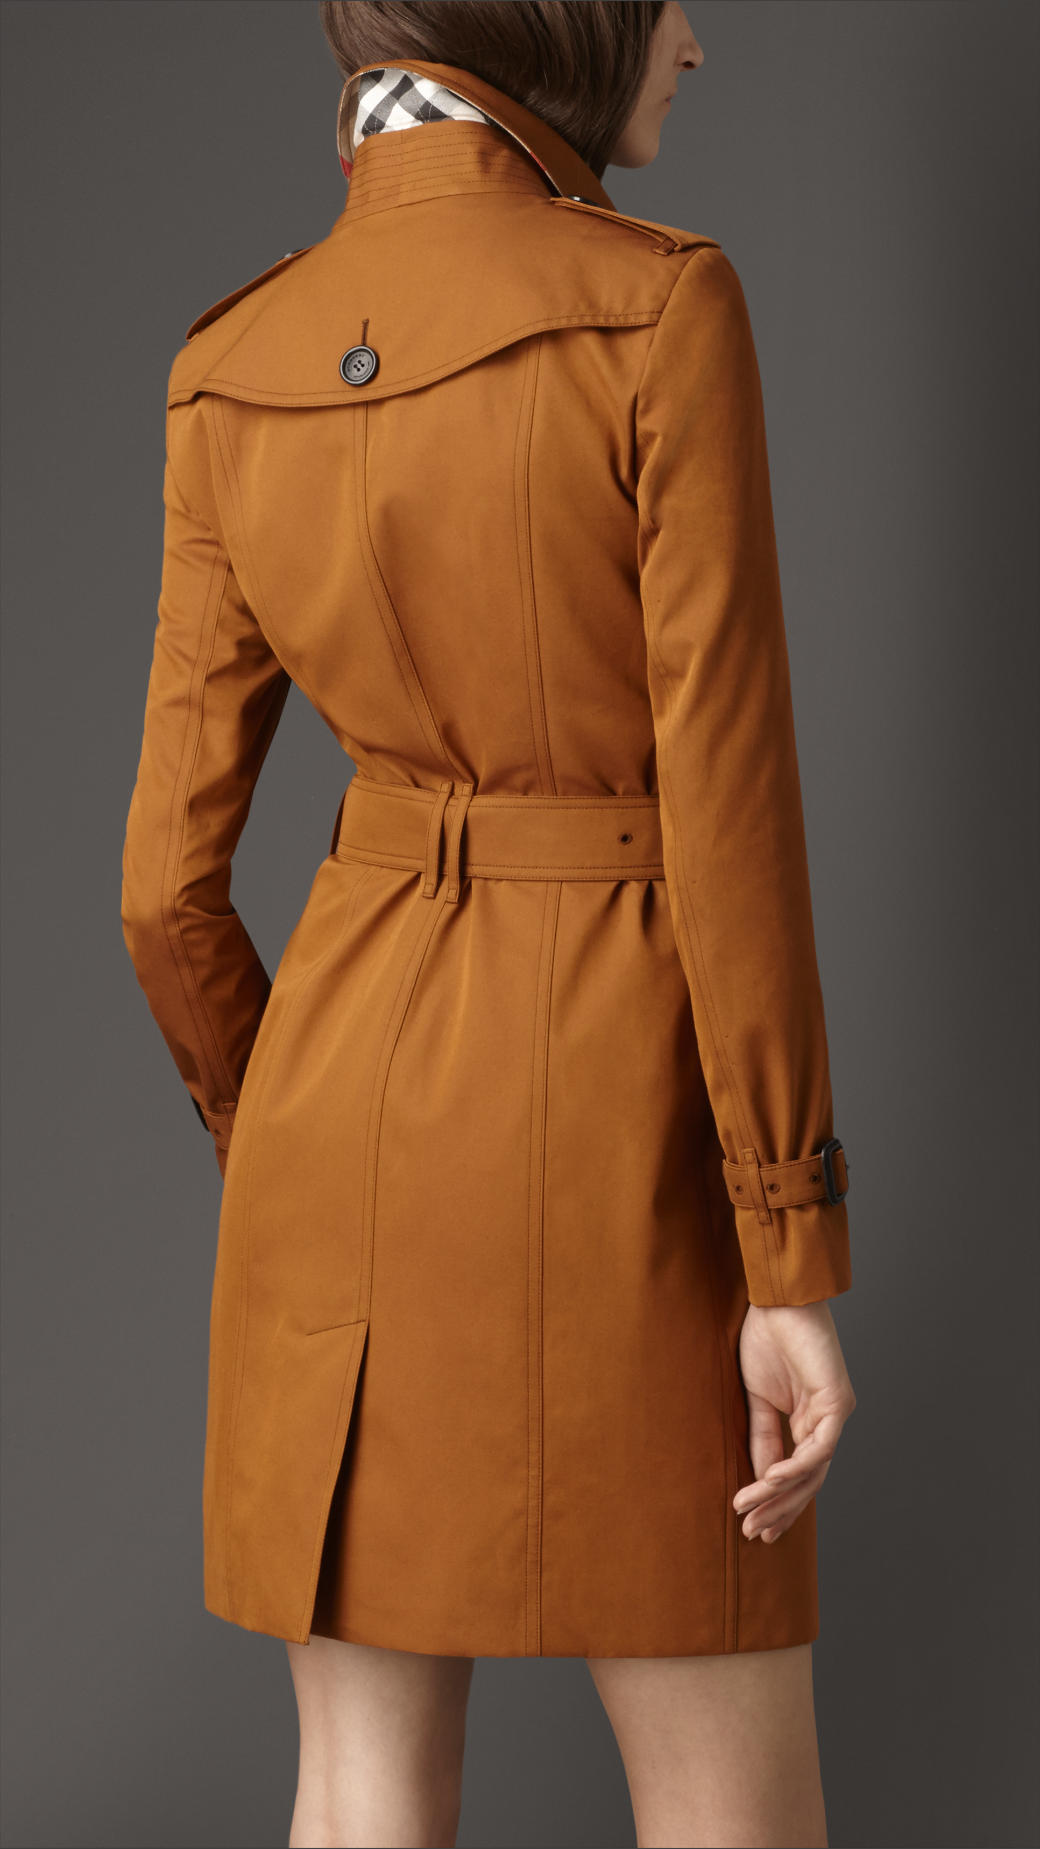 Burberry Long Slim Fit Gabardine Trench Coat in Toffee (Brown) - Lyst